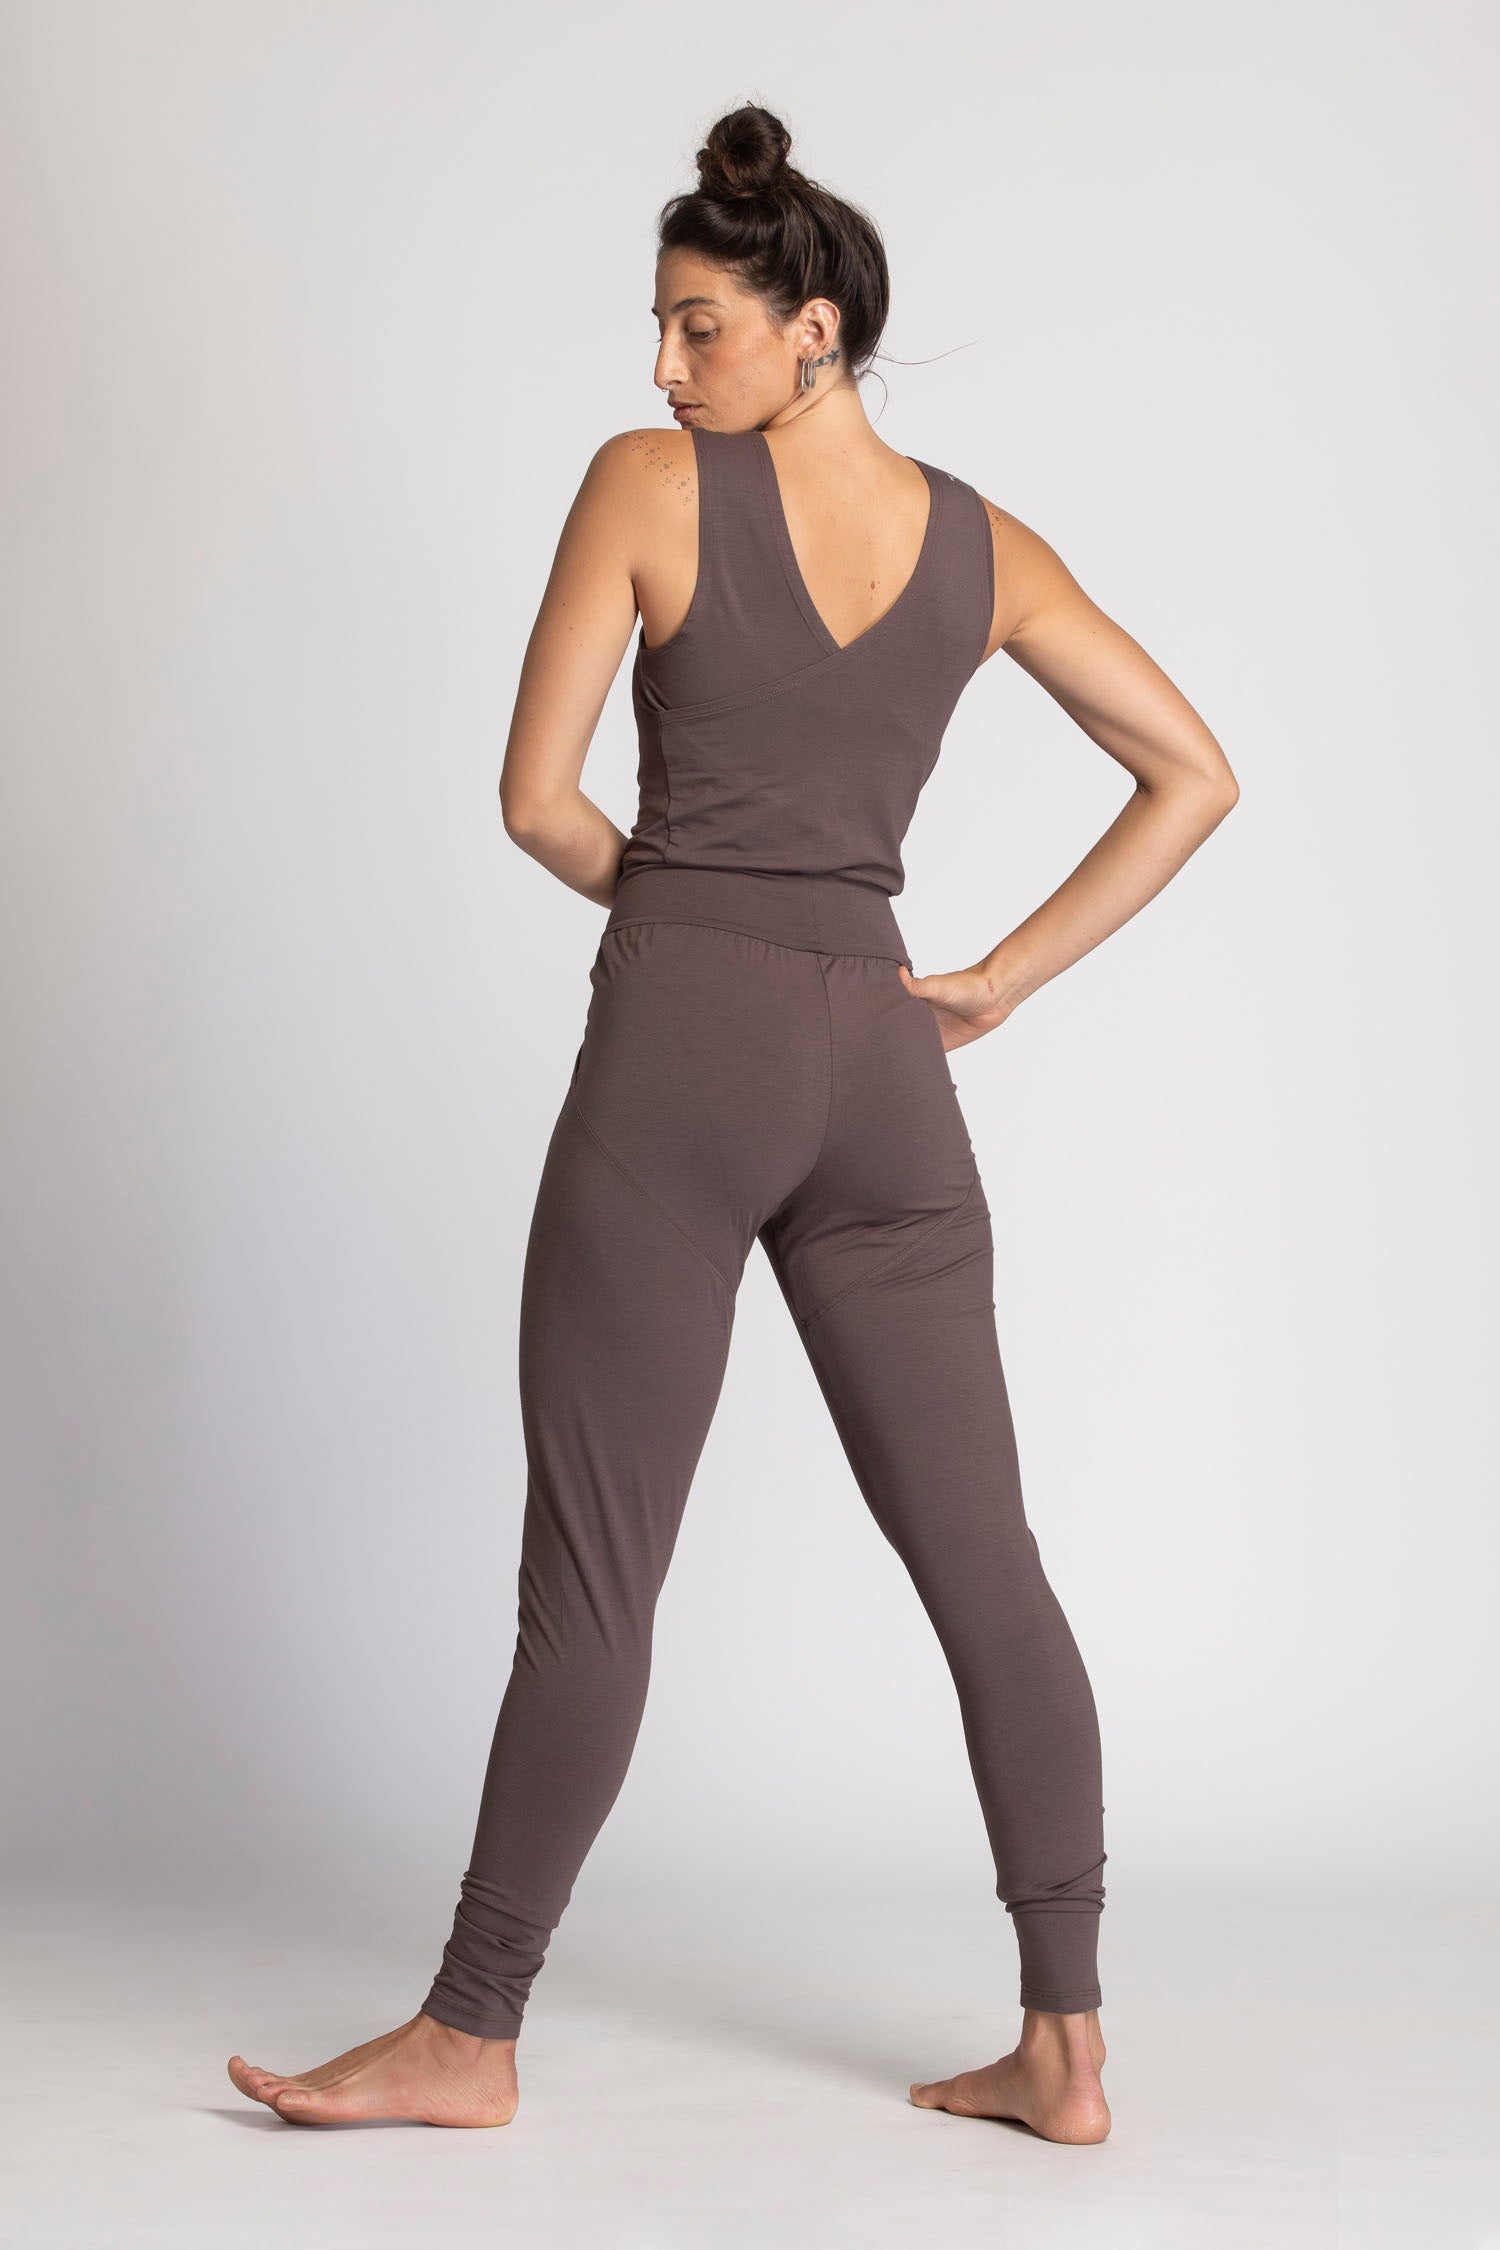 EHQJNJ Yoga Jumpsuits for Women Loose Women's Casual Solid Pocket